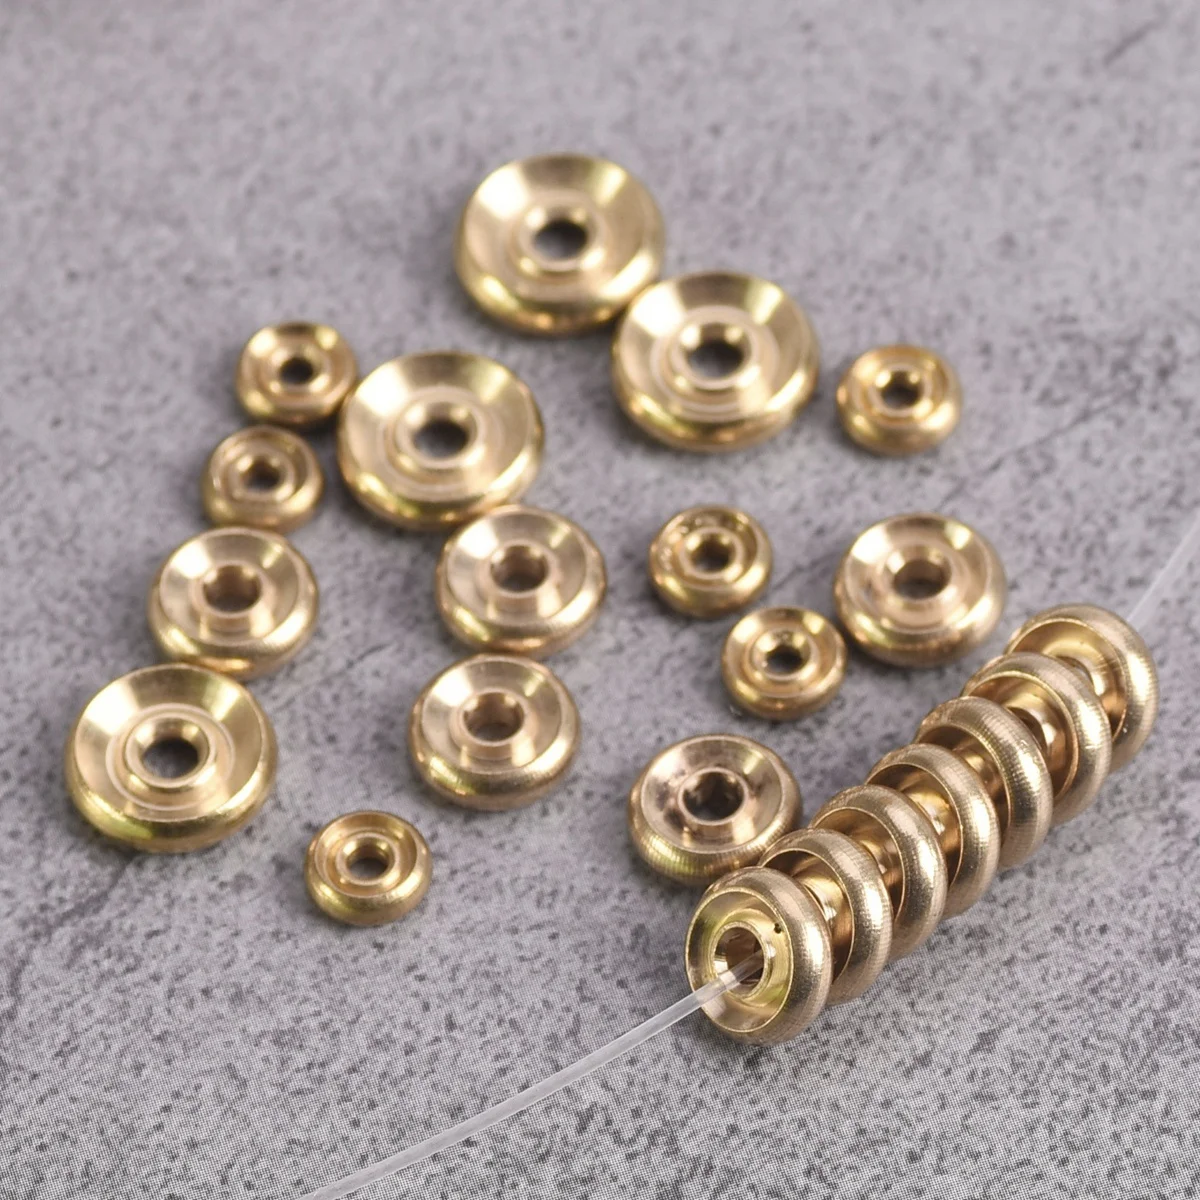 30pcs Flat Round Rondelle 6mm 8mm 10mm Solid Brass Metal Light Gold Color Loose Spacer Beads lot for Jewelry Making Findings alto trombone brass gold lacquer bb tone b flat wind instrument